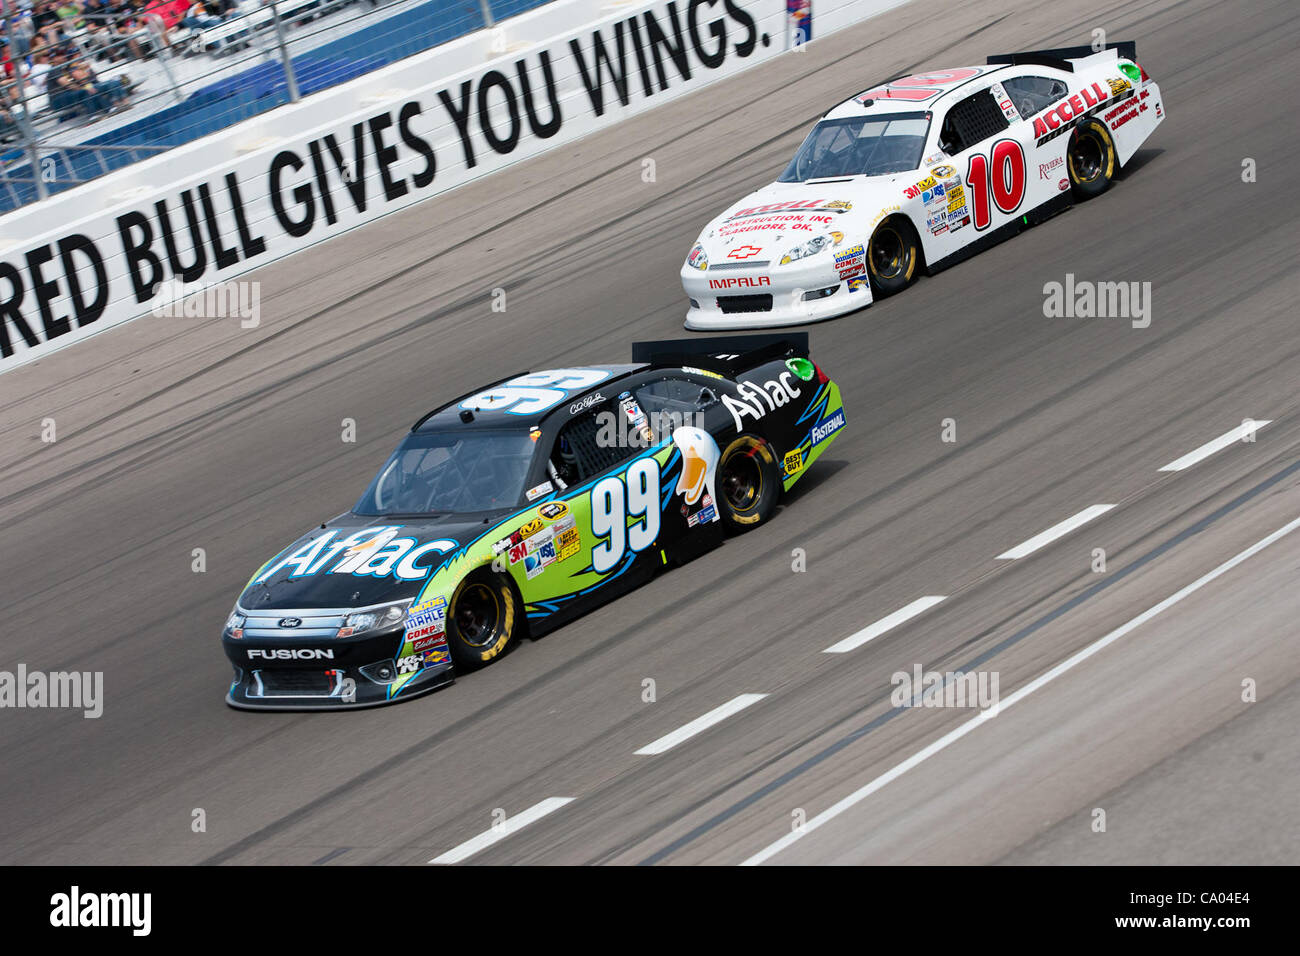 March 11, 2012 - Las Vegas, Nevada, U.S - Carl Edwards, driver of the #99 Aflac Ford Fusion, passes the lap car of David Reutimann, driver of the #10 Accell Construction Chevrolet Impala, during the exciting racing action at the NASCAR Sprint Cup Series Kobalt Tools 400 at Las Vegas Motor Speedway i Stock Photo